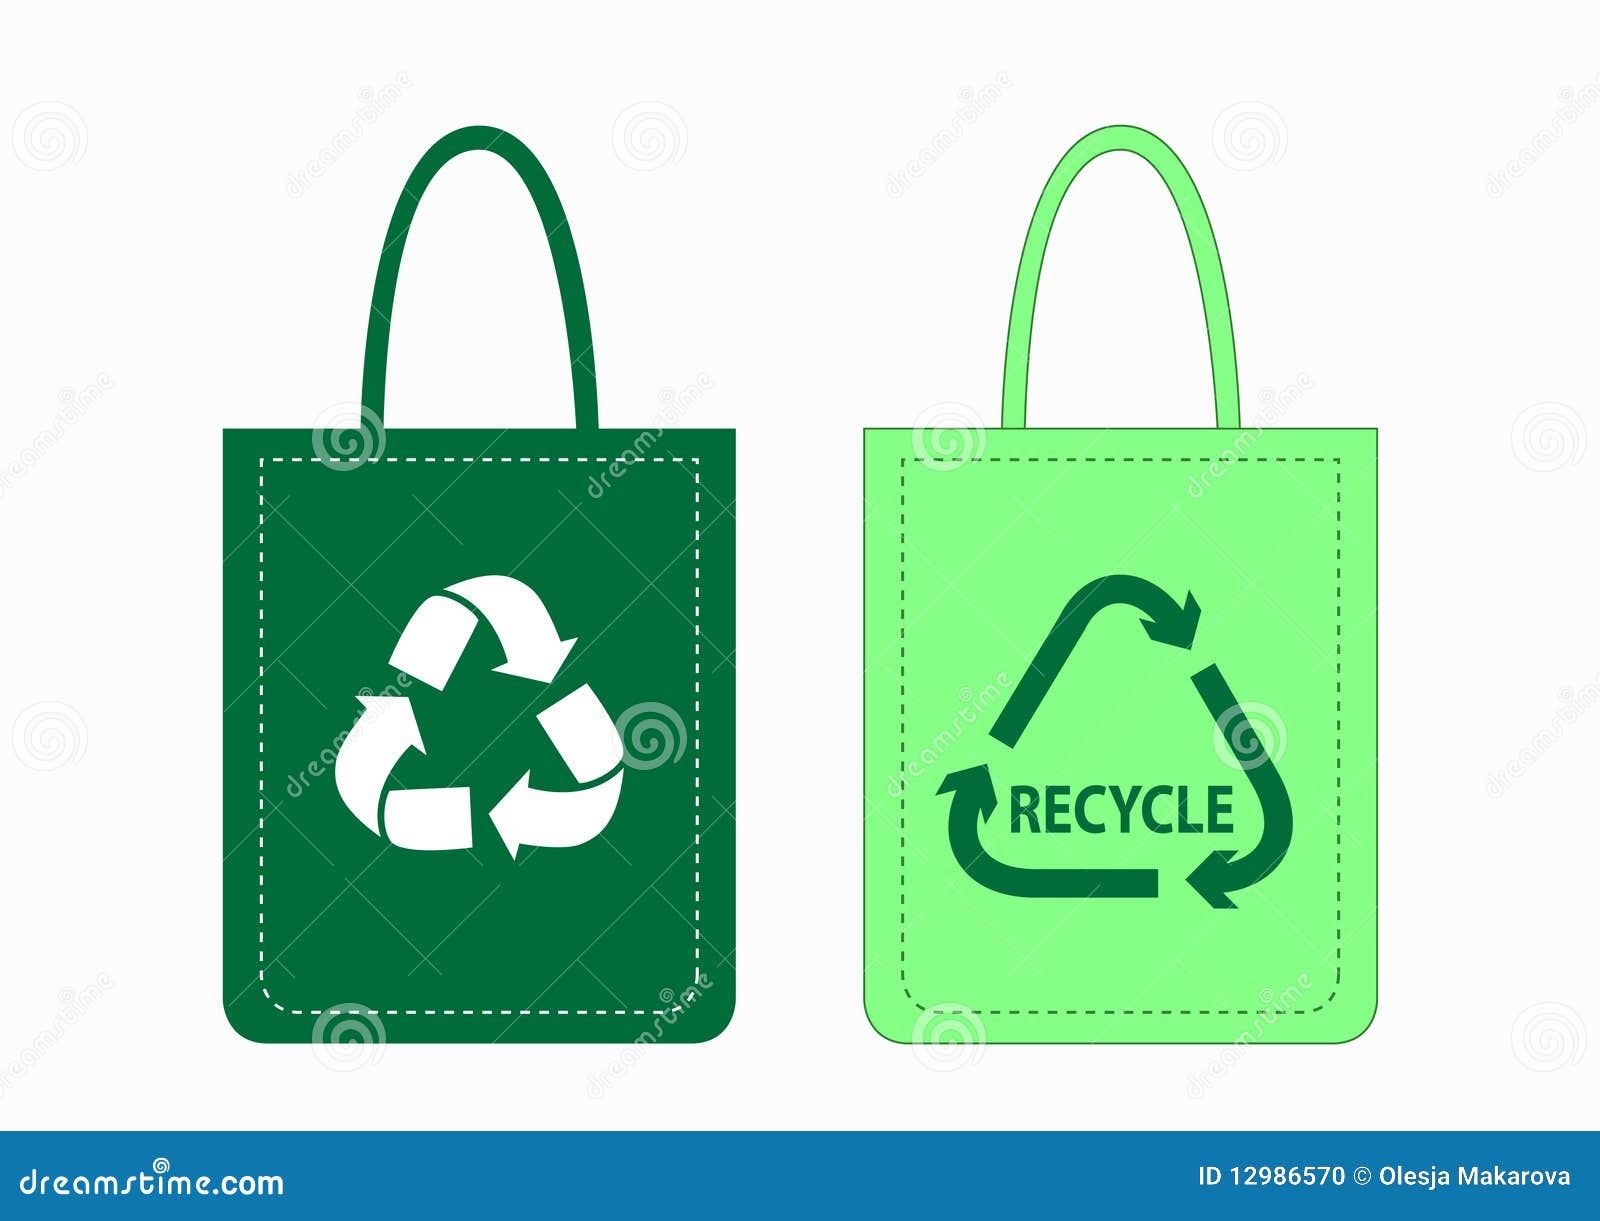 Shopping Bags With Recycle Symbols Stock Photo - Image: 12986570